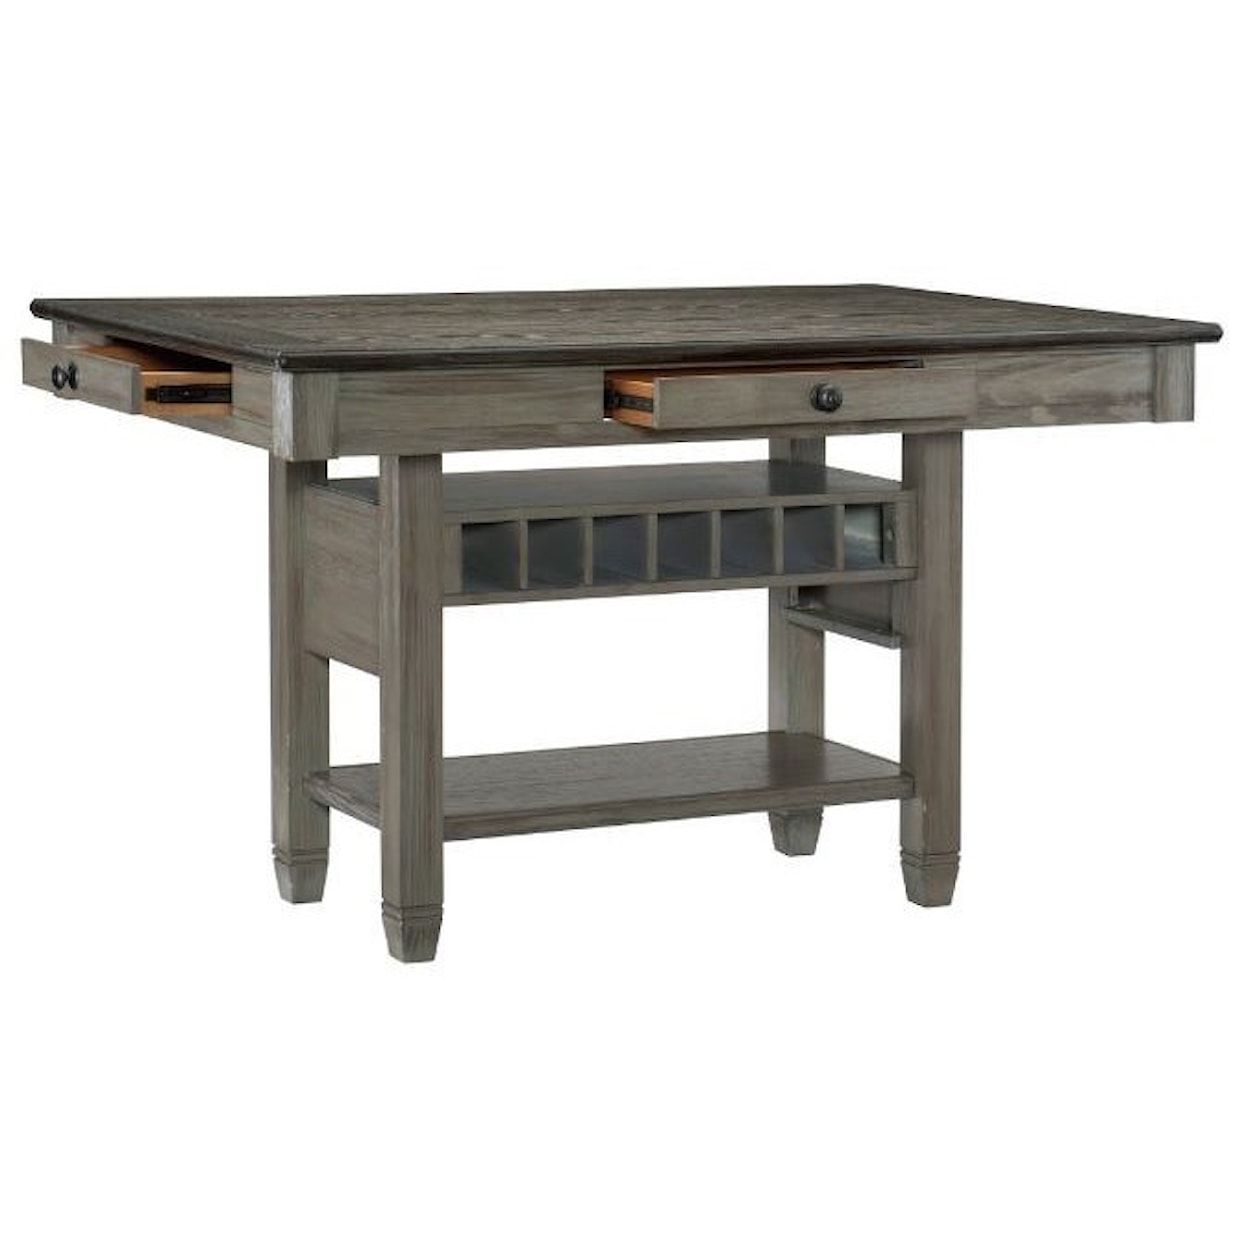 Homelegance Furniture Granby Counter Height Table